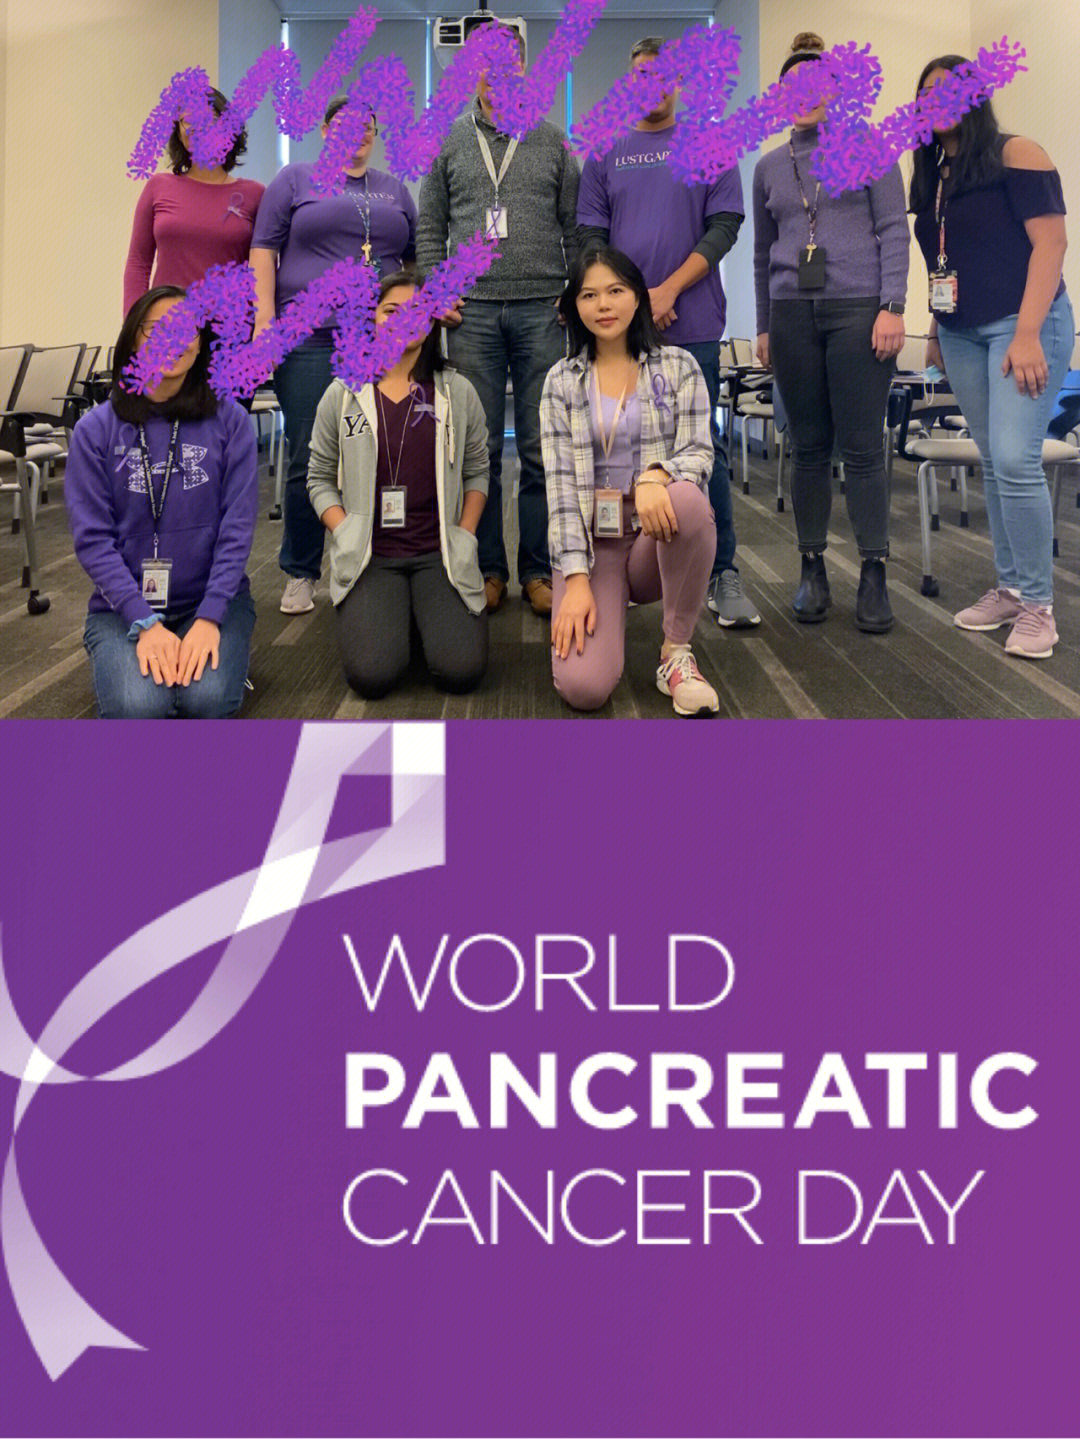 pancreatic cancer is one of the most aggressive malignancies and